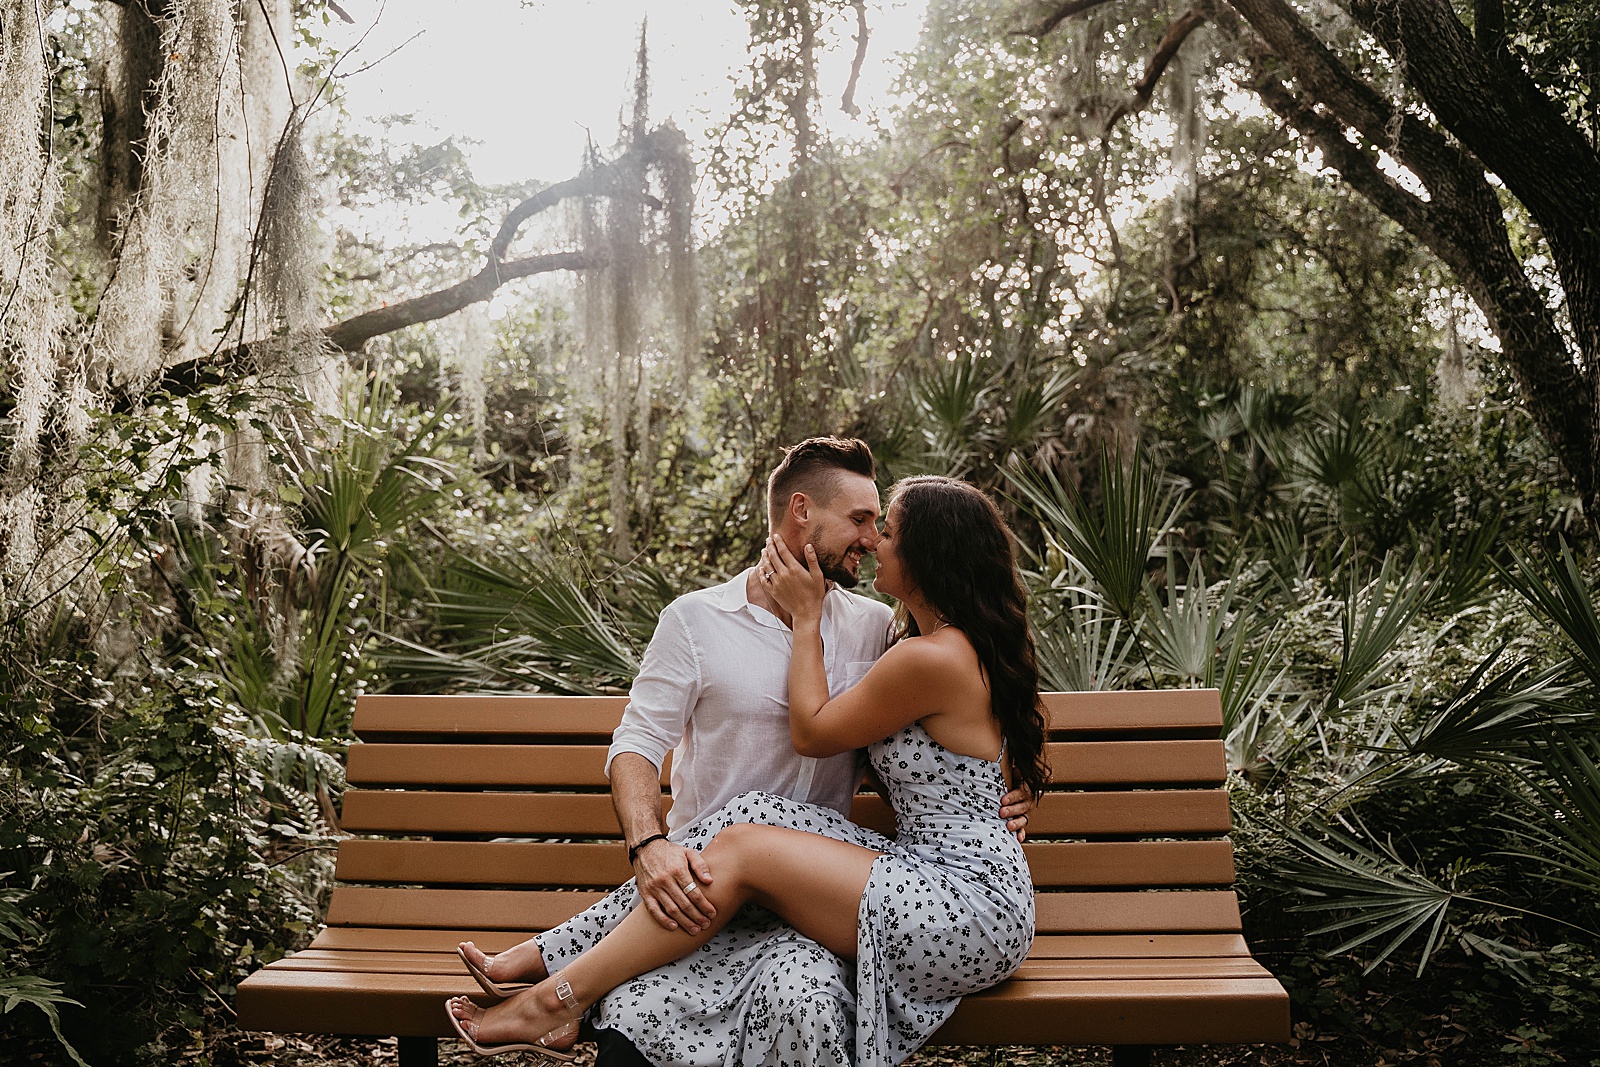 Delray Oaks Engagement Session captured by West Palm Beach Engagement Photographer, Krystal Capone Photography